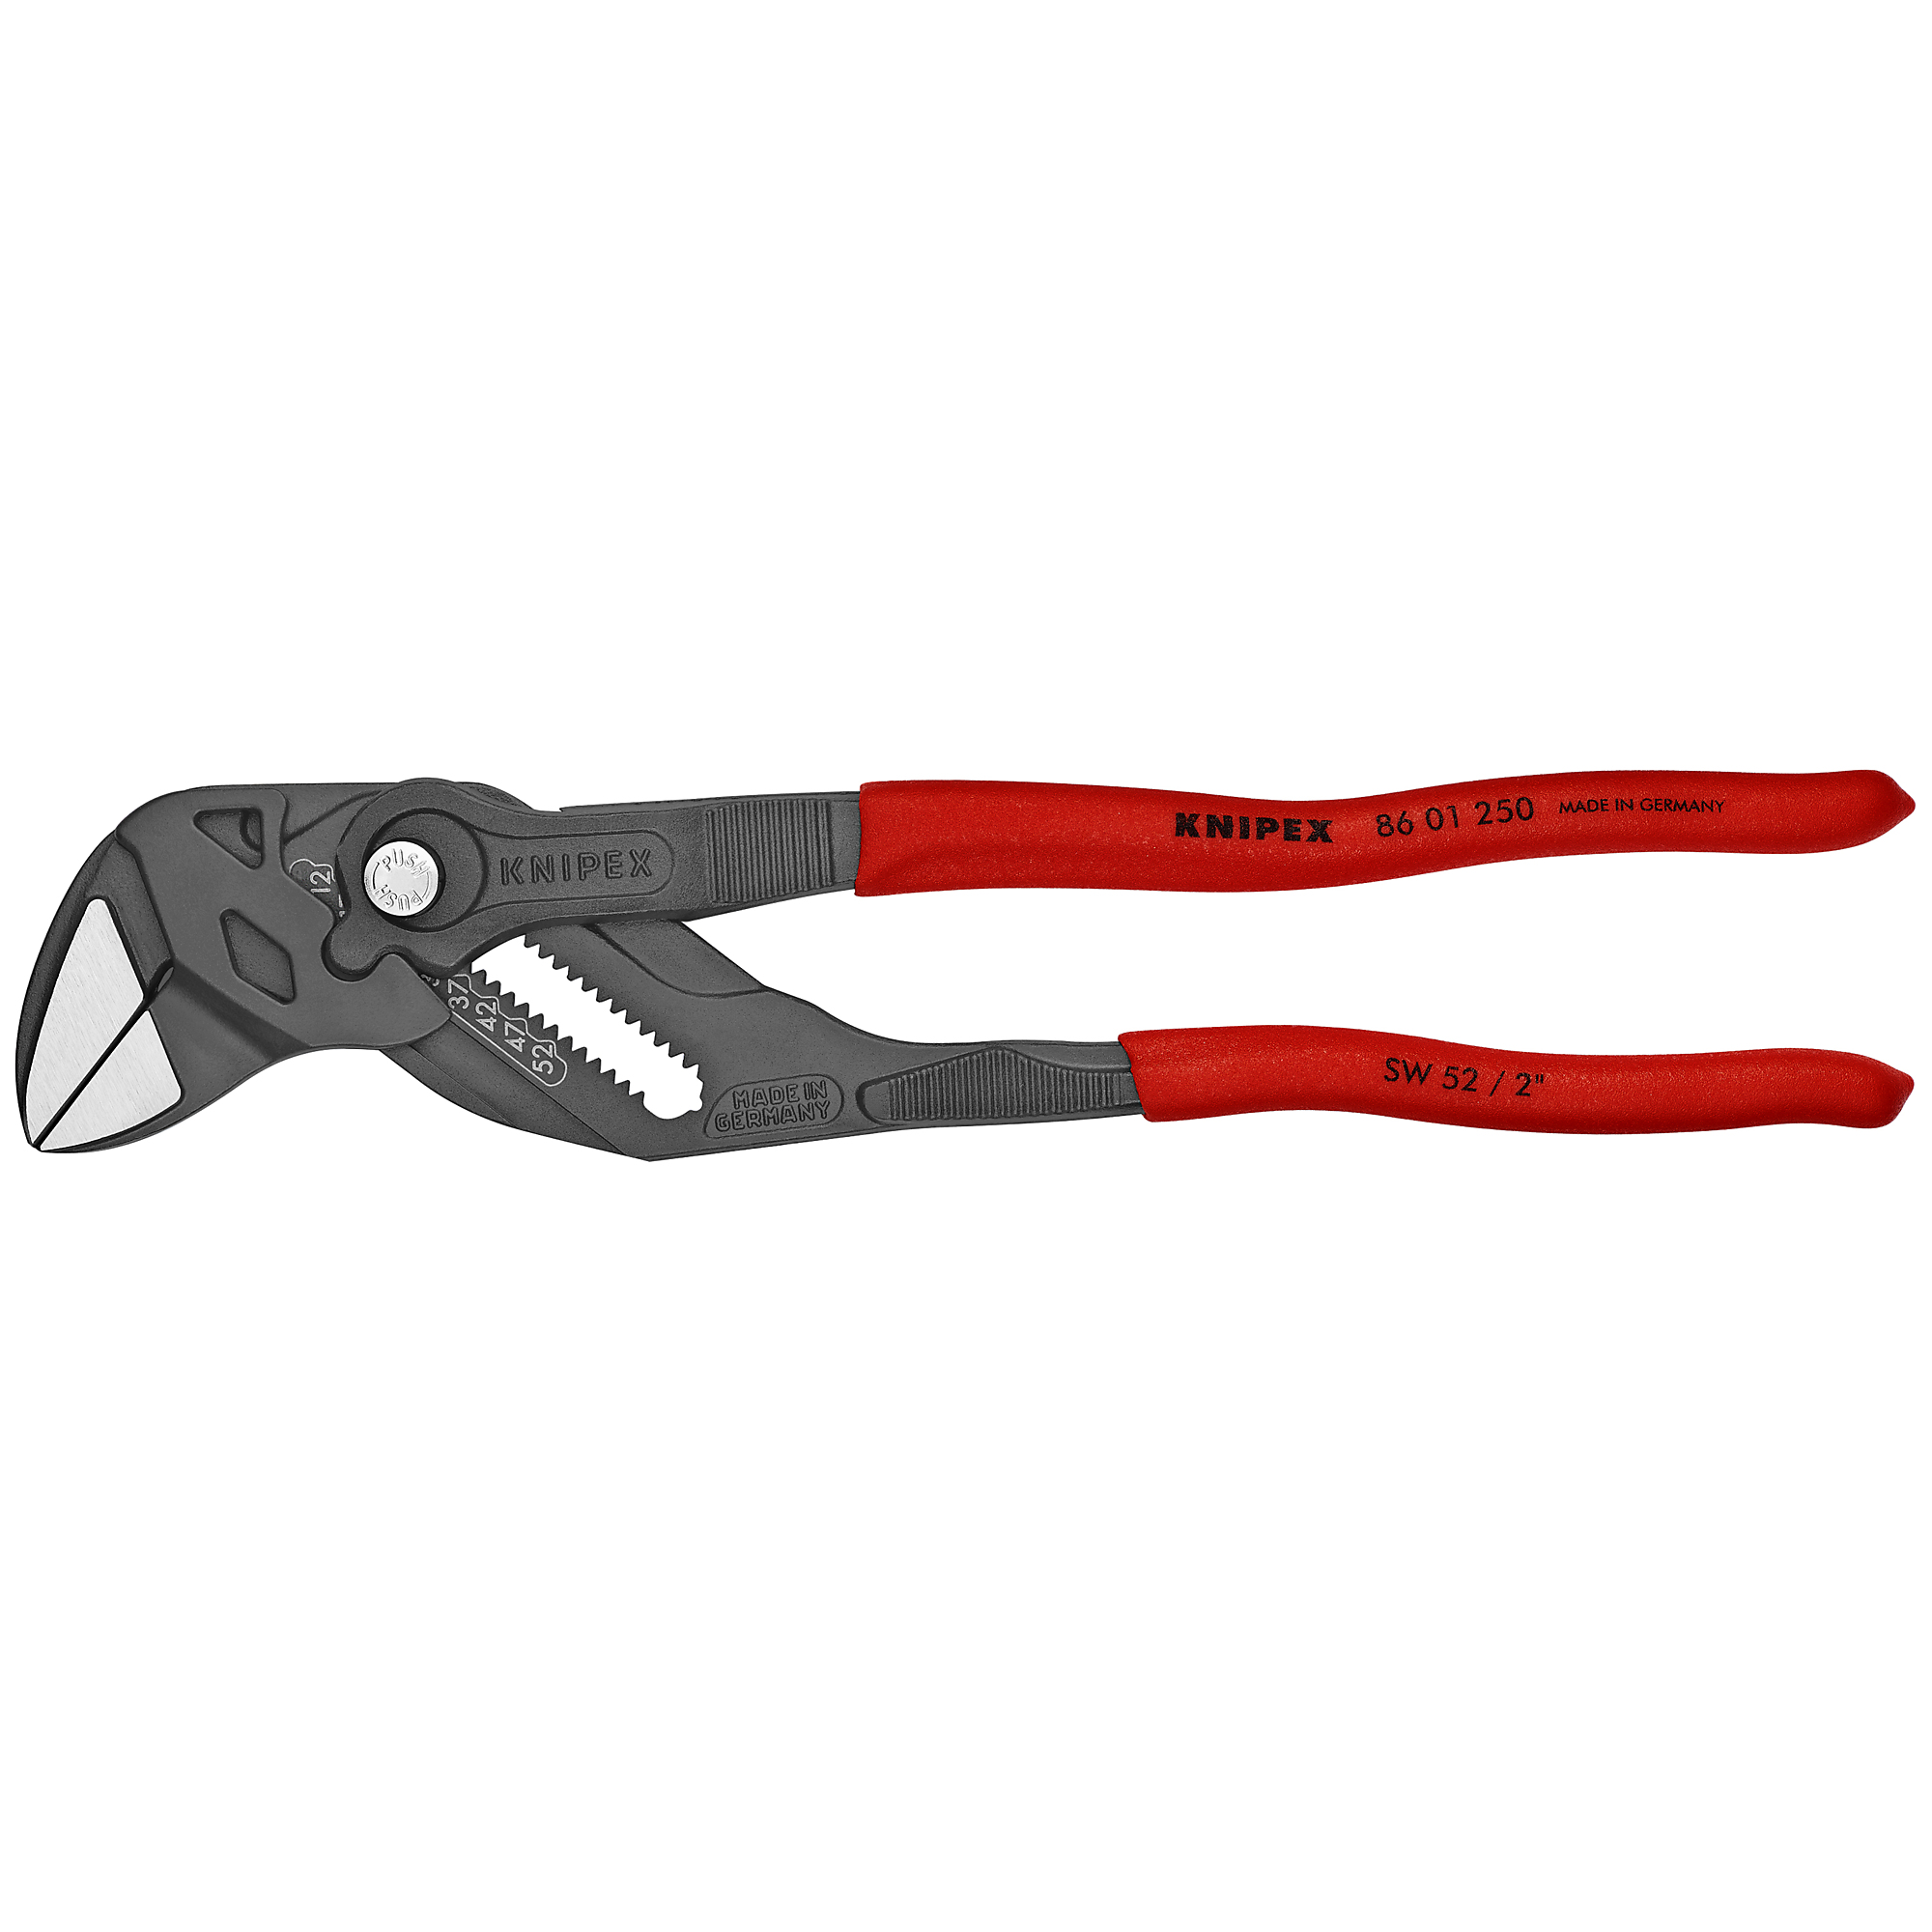 KNIPEX, Pliers Wrench, Non-slip plastic, Bulk, 10Inch, Pieces (qty.) 1 Material Steel, Jaw Capacity 2 in, Model 86 01 250